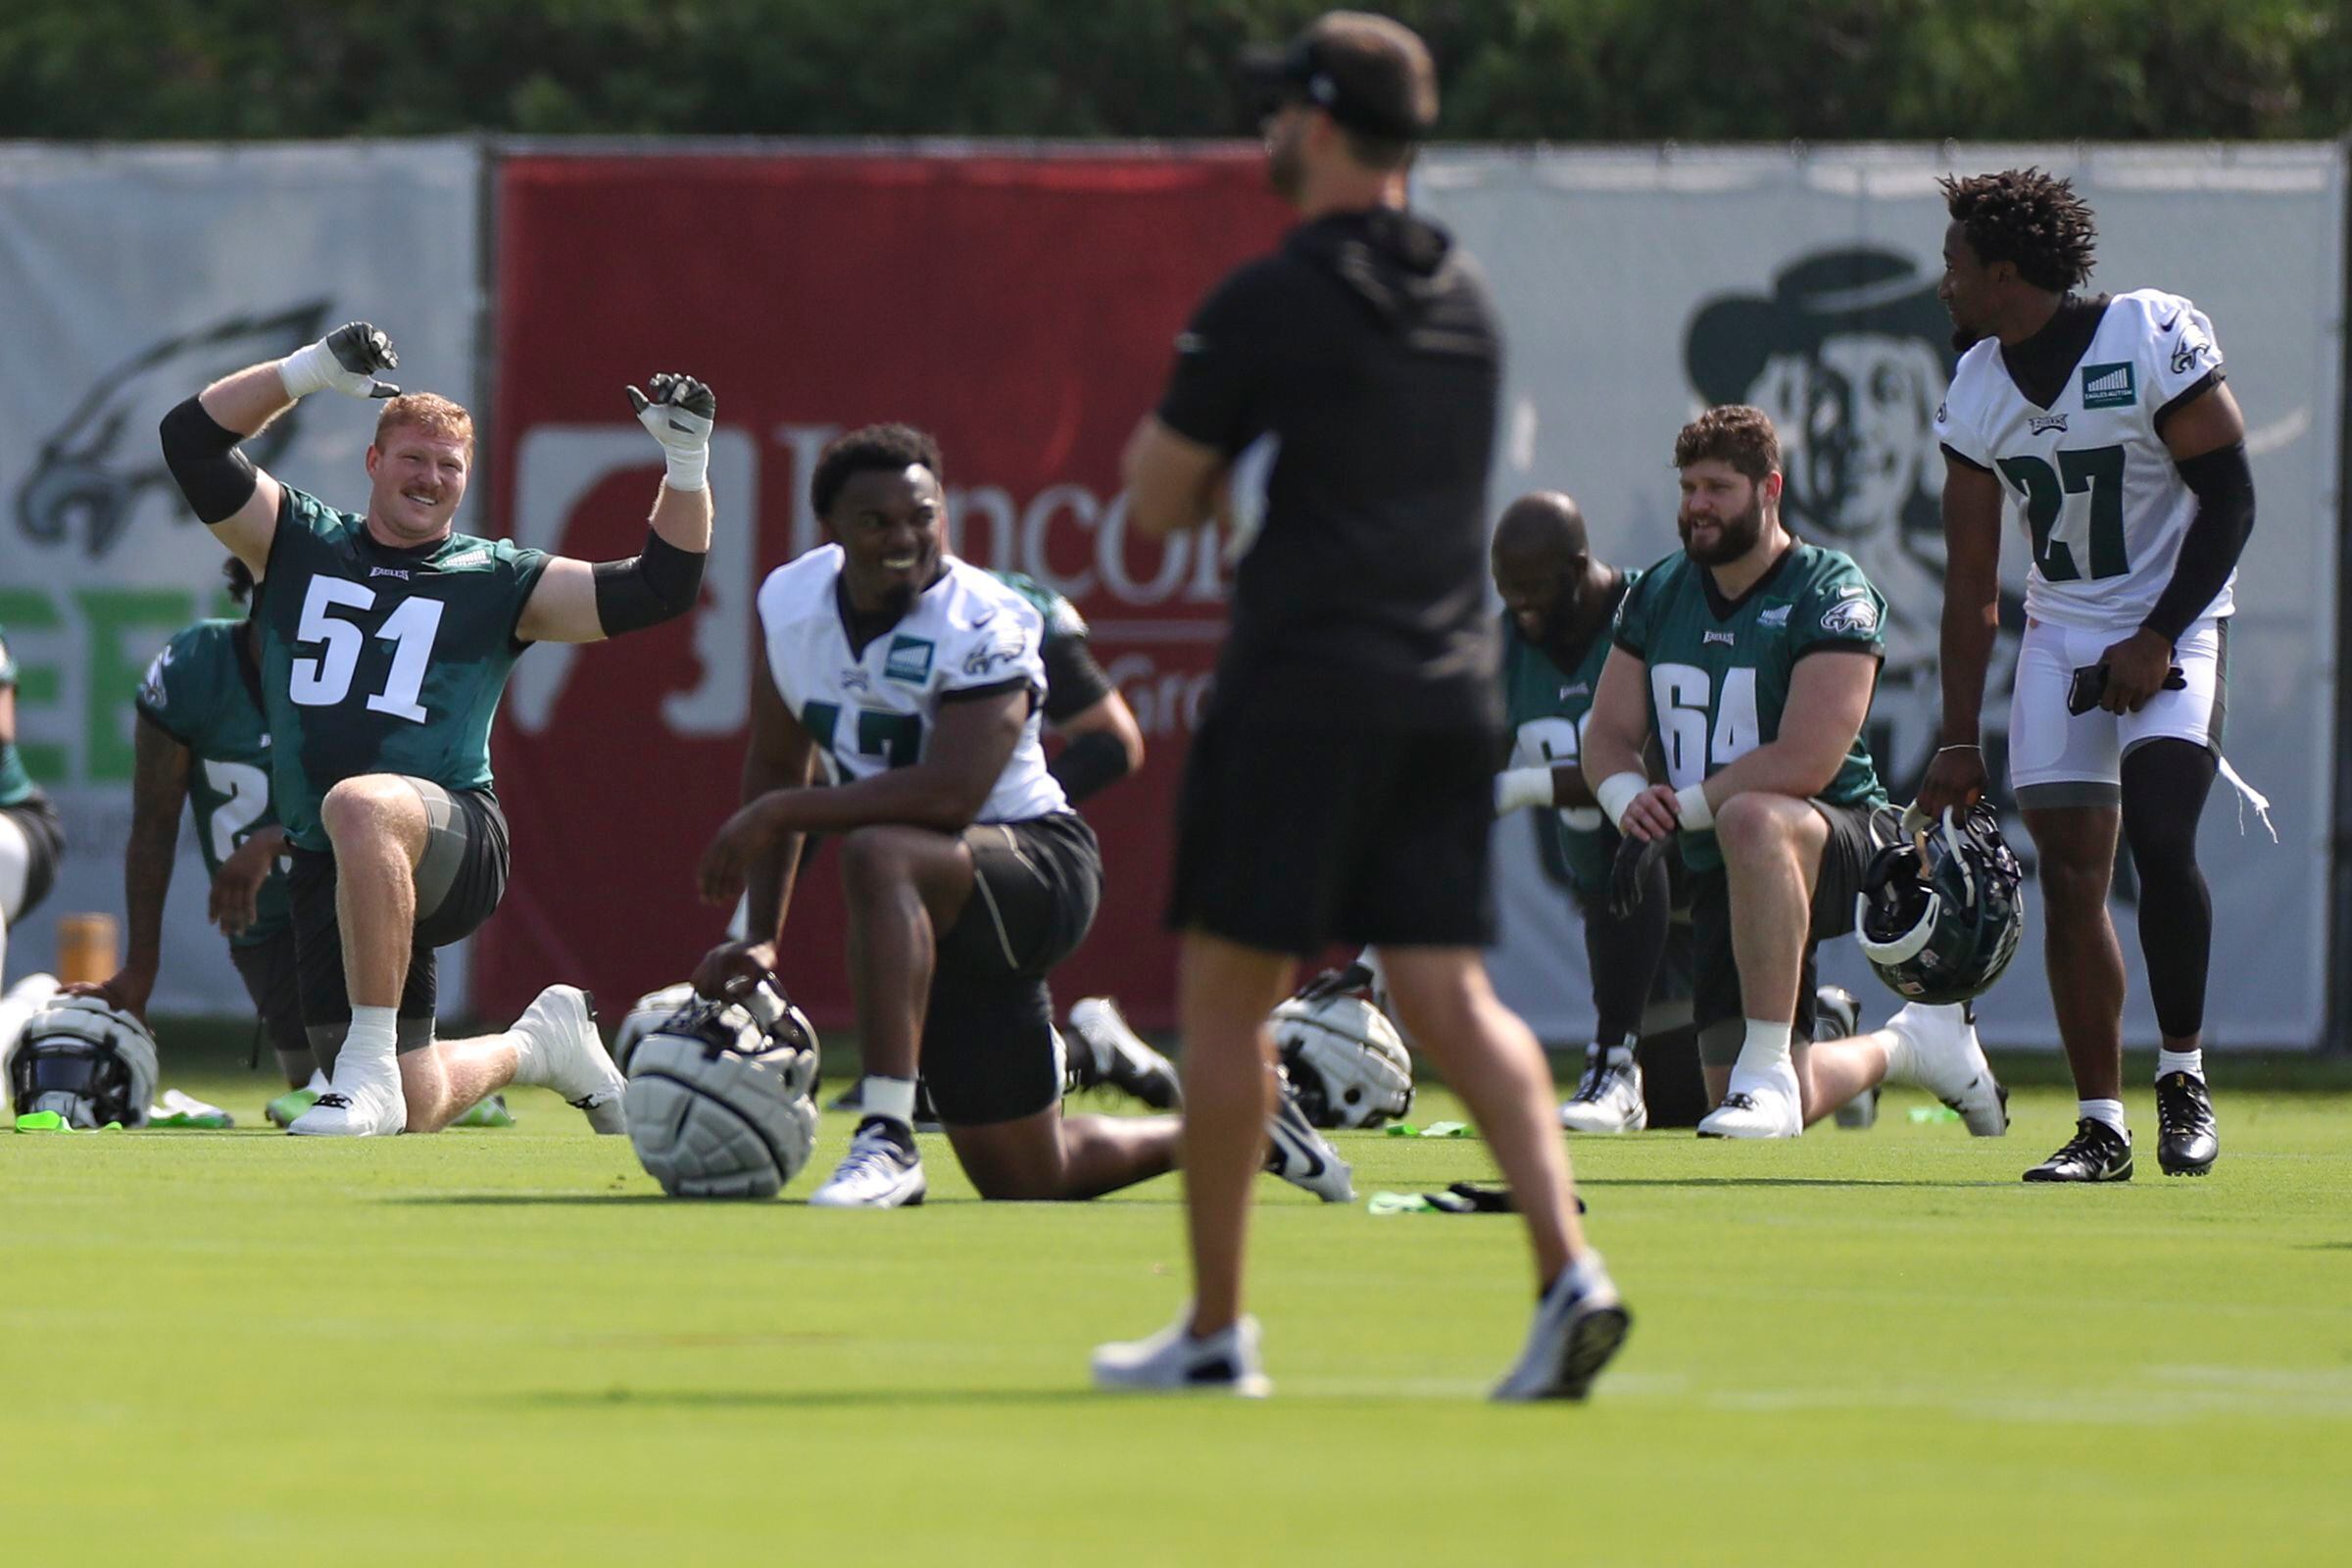 Eagles' training camp: 10 takeaways from the unofficial depth chart